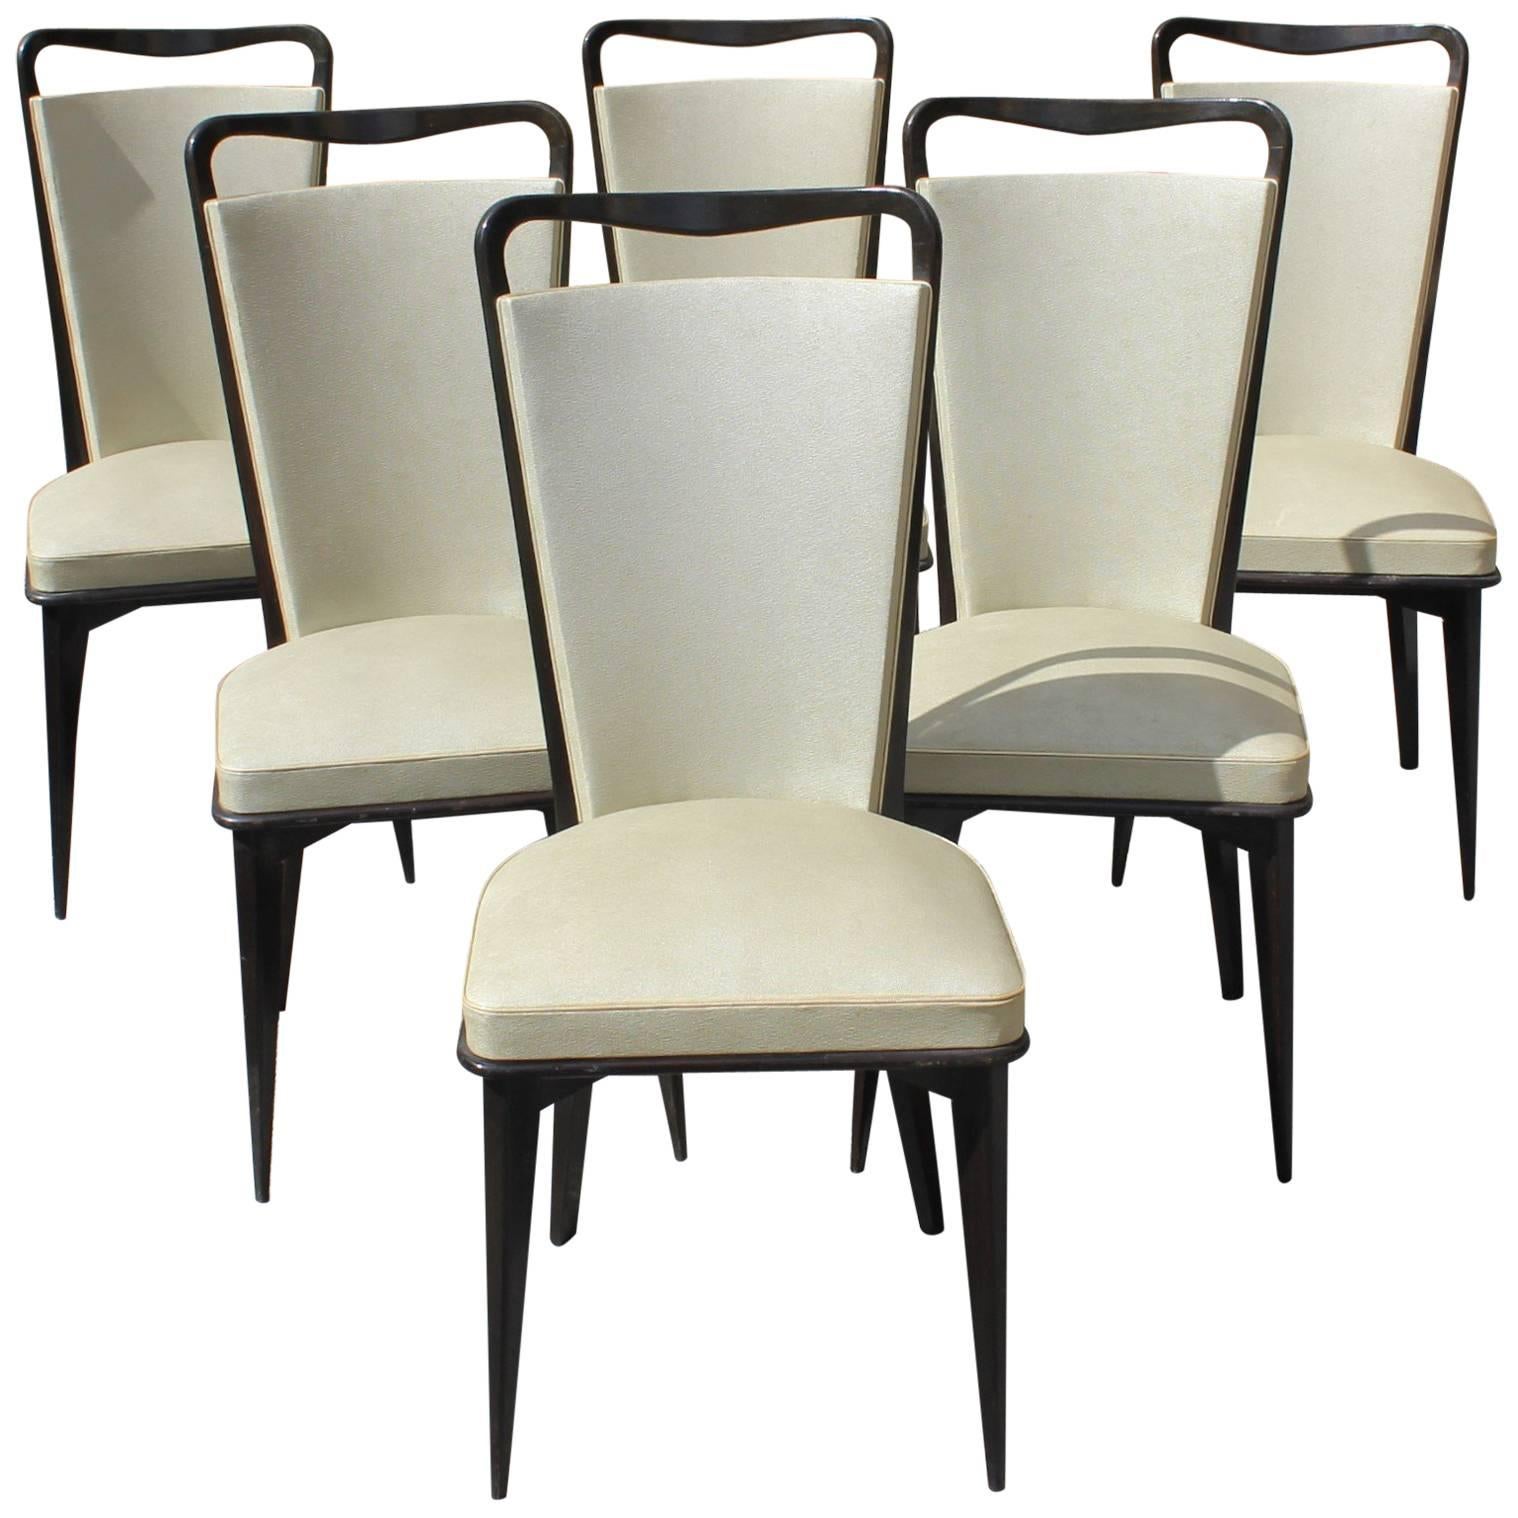 Set of Six French Art Deco Solid Macassar Ebony Dining Chairs, circa 1940s